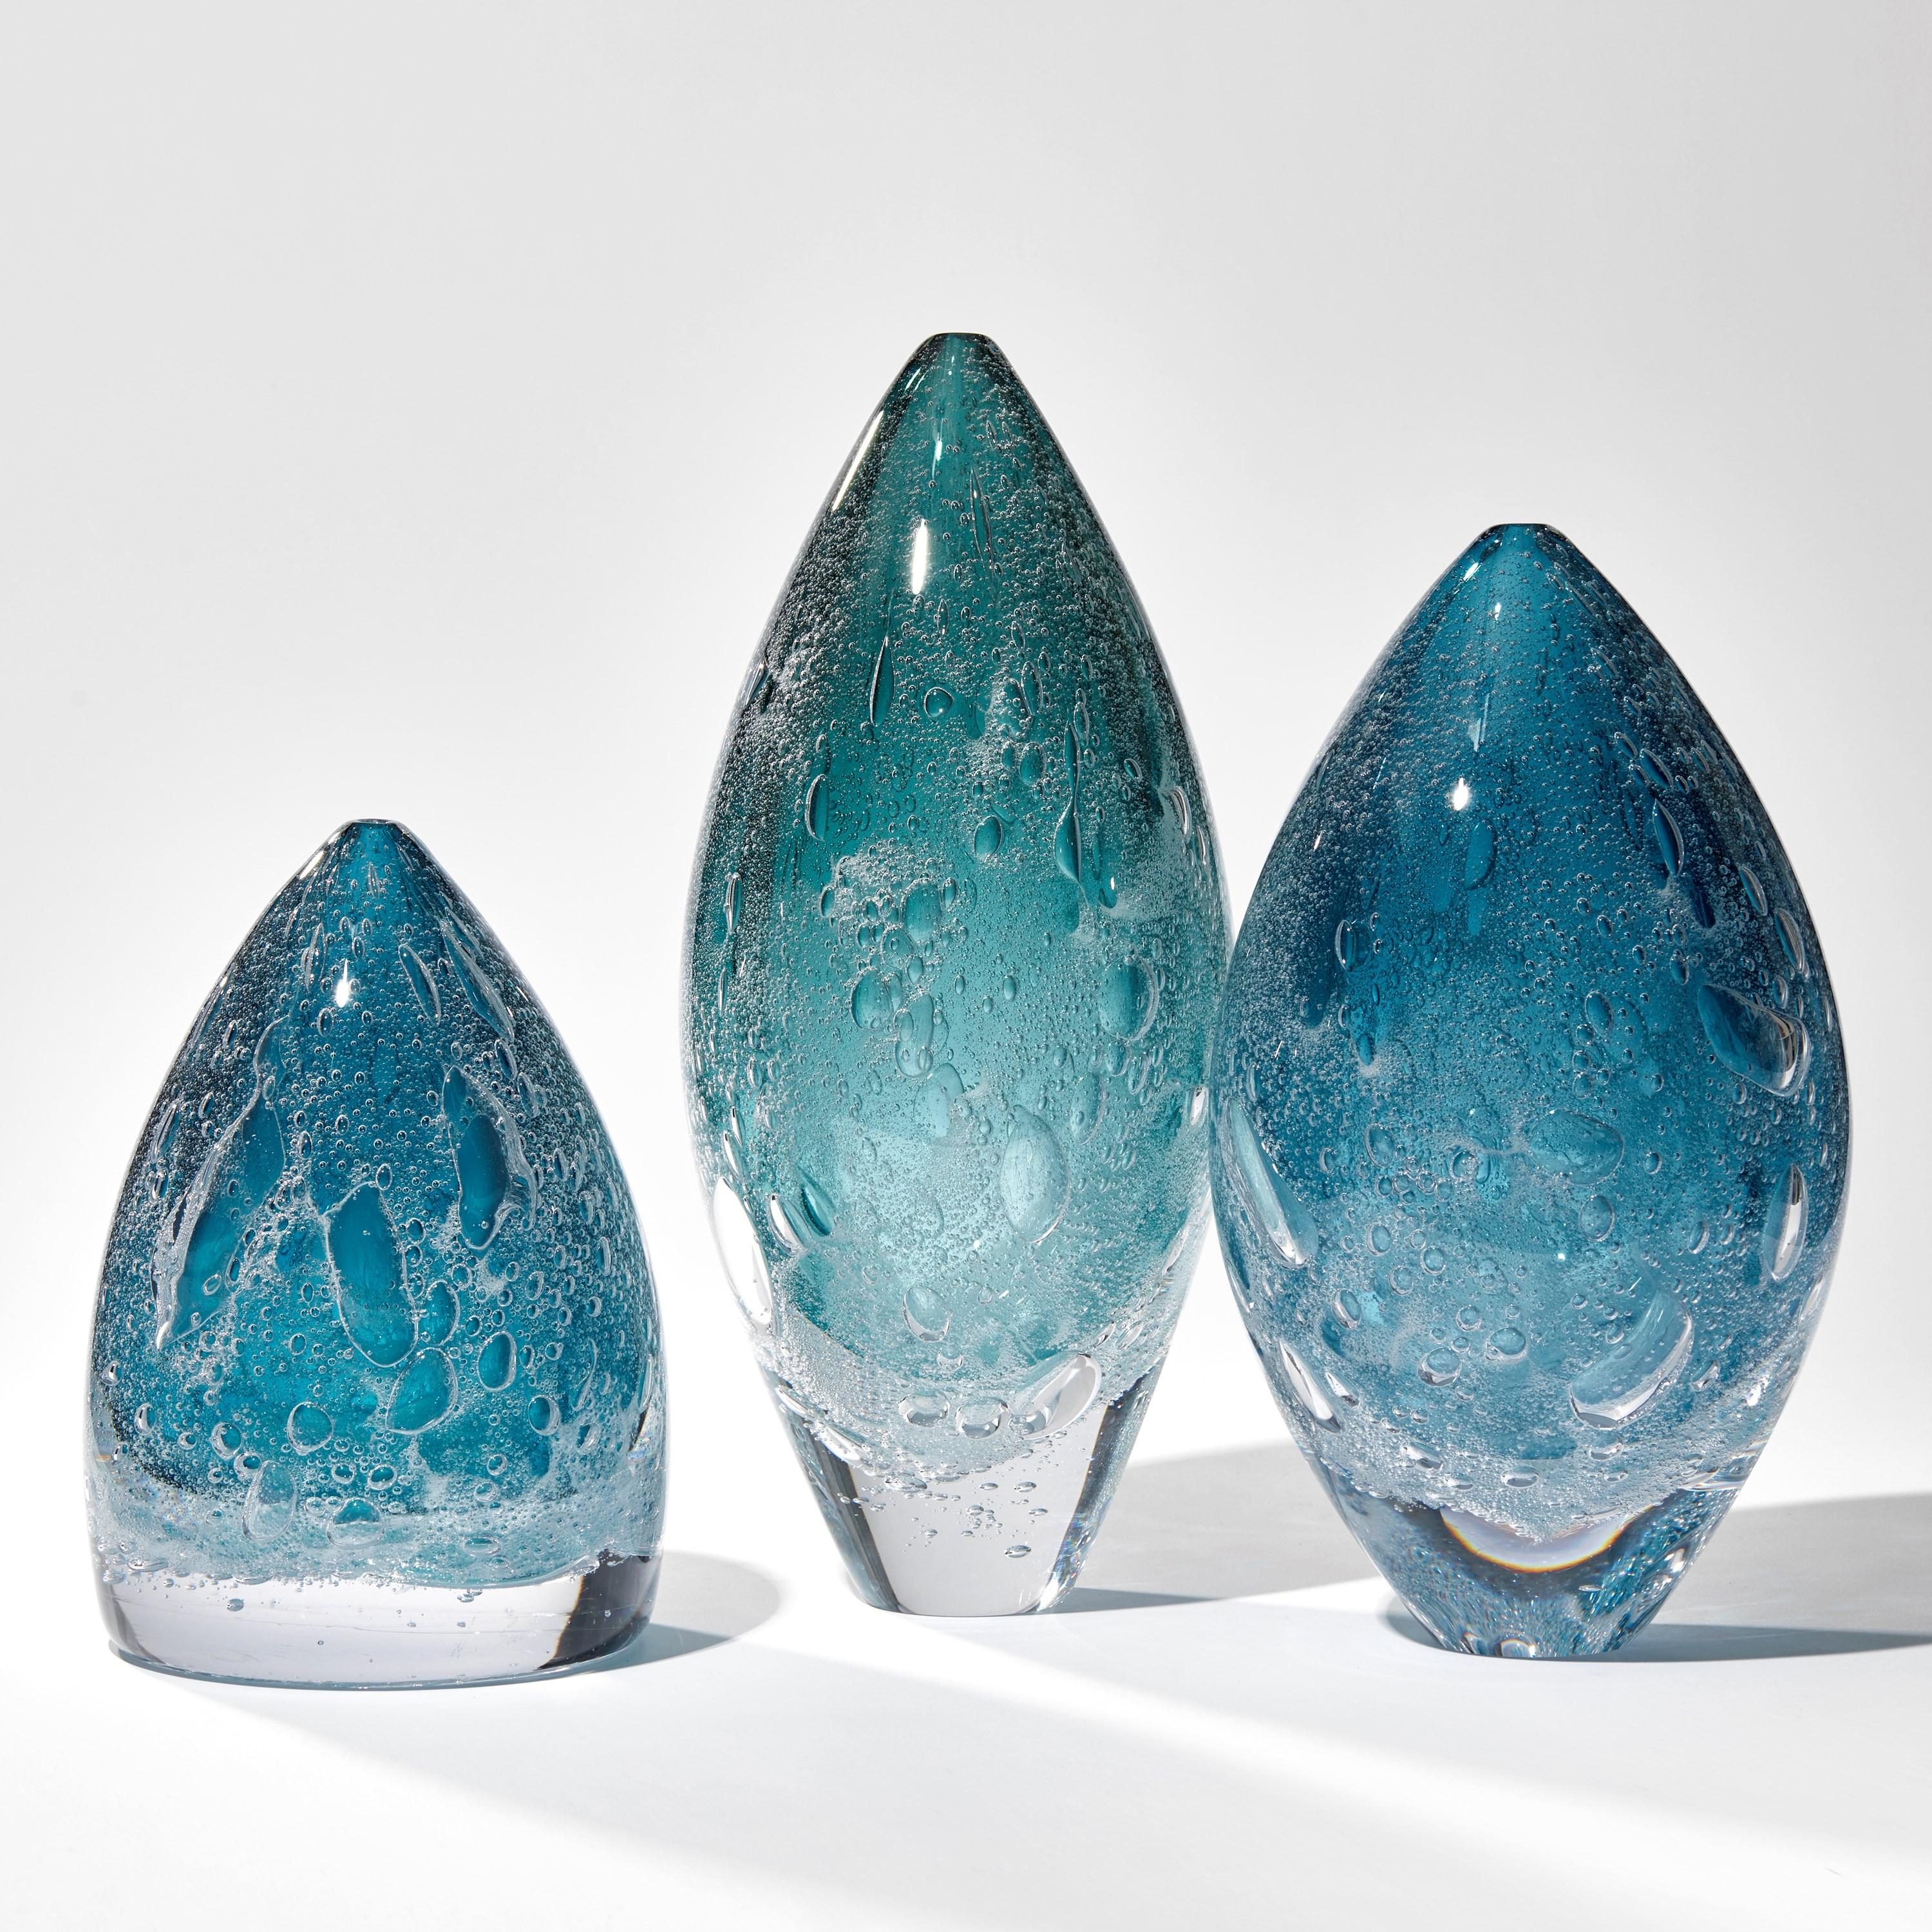 British Turbulence in Steel Grey, a Teal Blue Glass Sculpture / Vessel by Anthony Scala